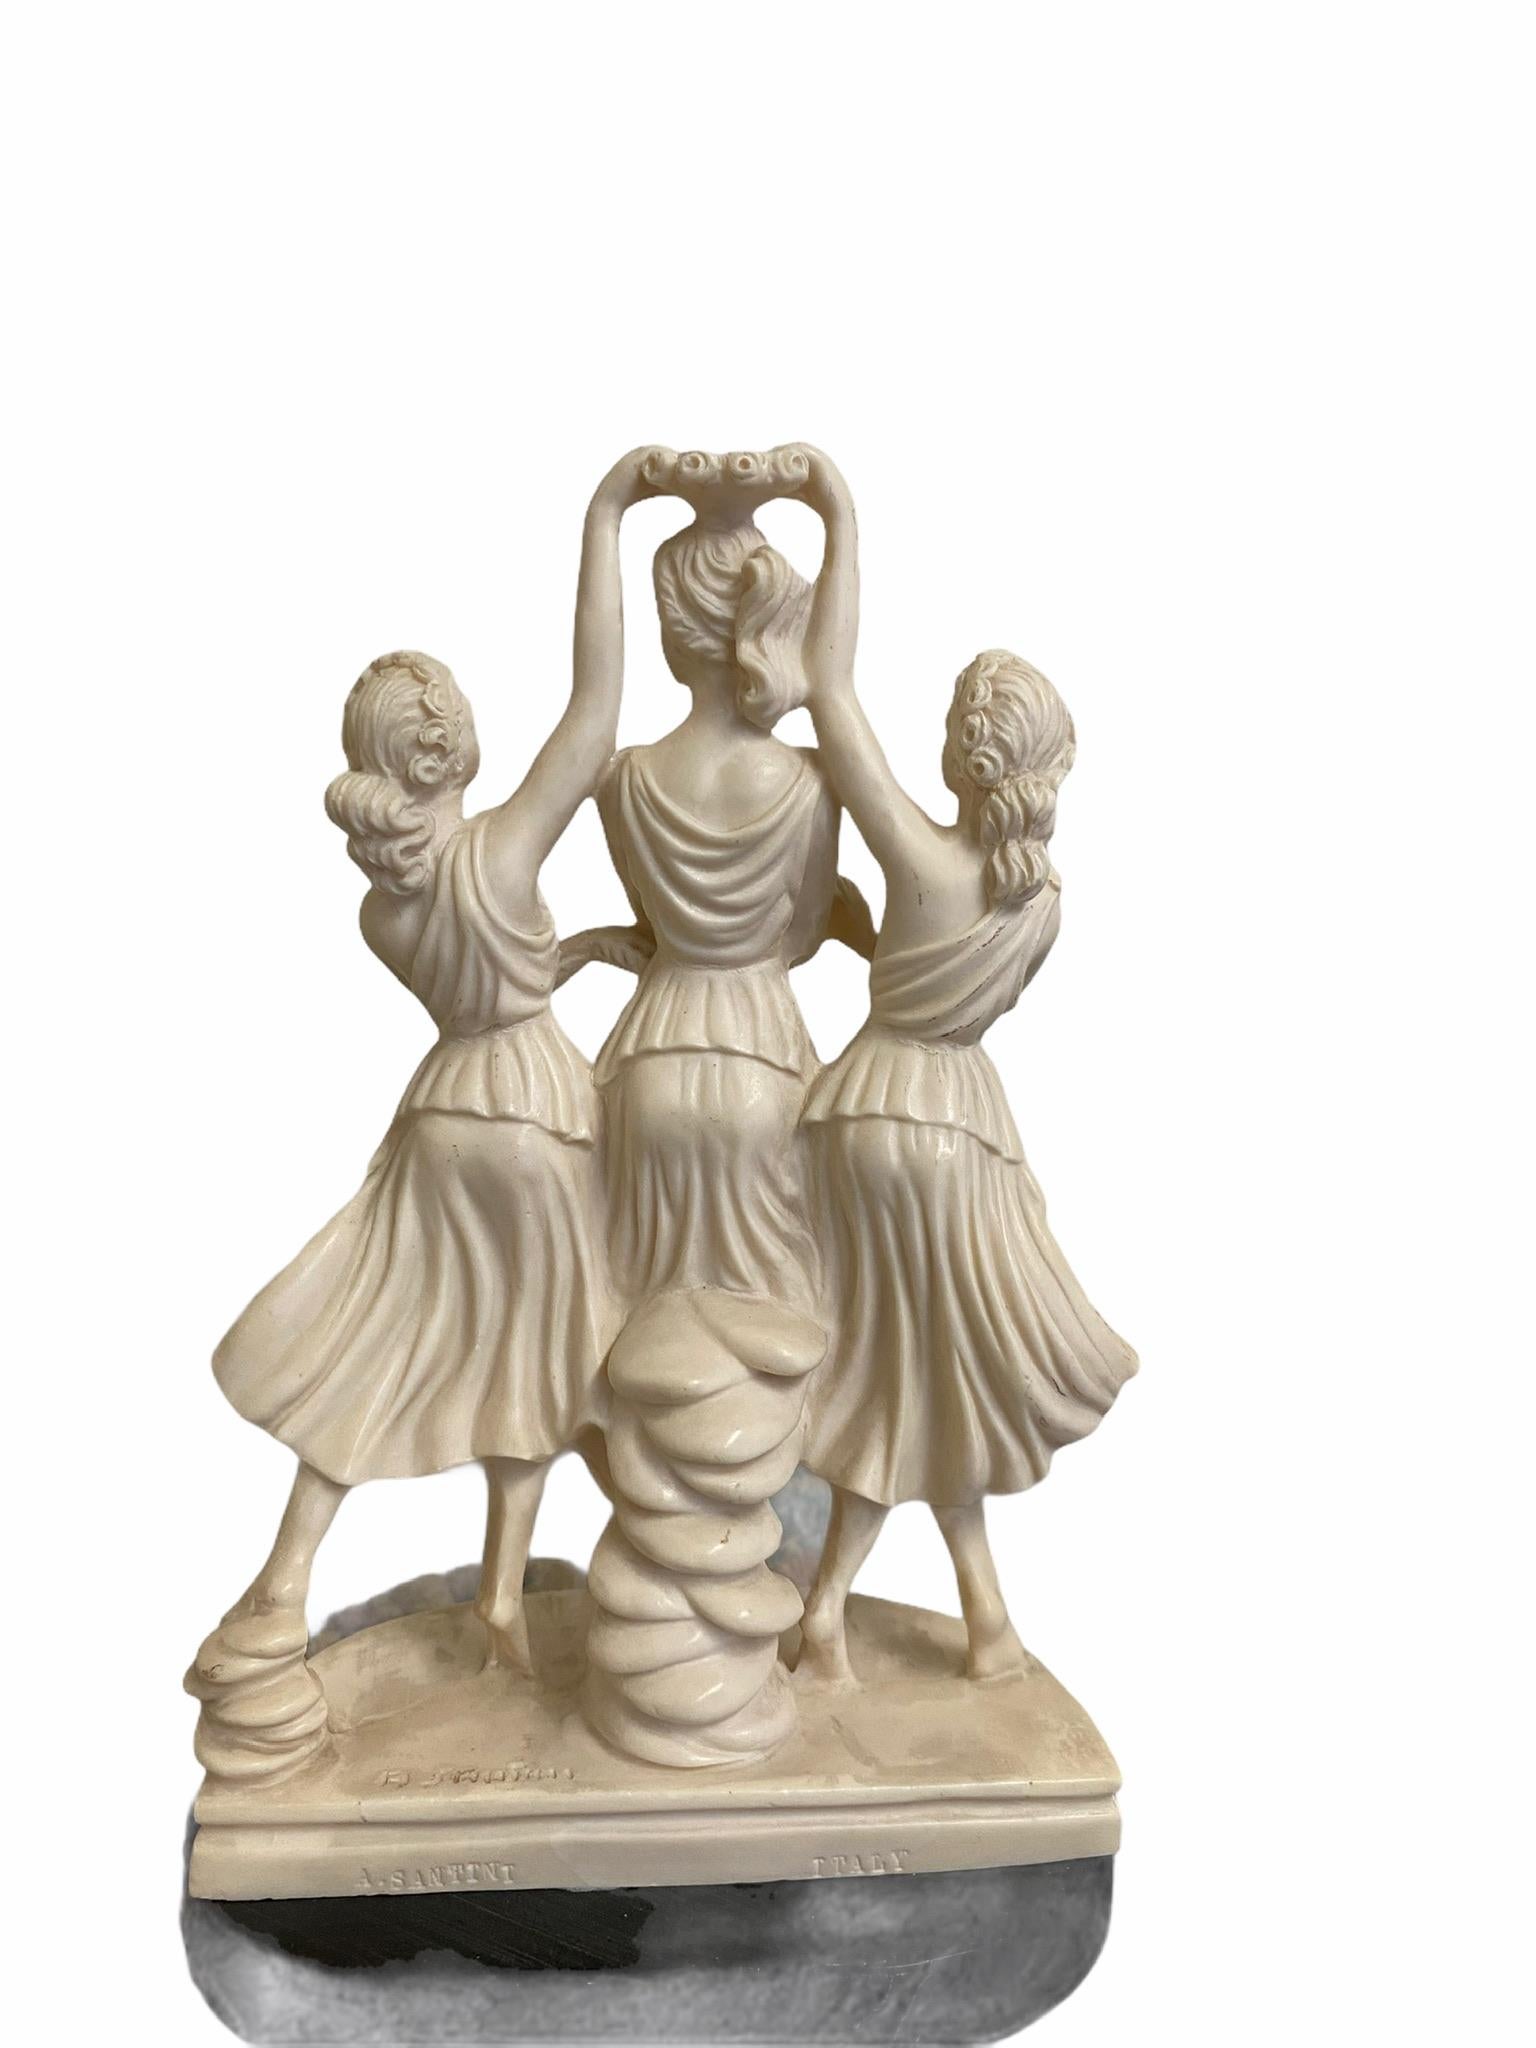 The beautiful vintage sculpture of Three Graces Dancing is in great condition no nicks or dents. This piece is handmade in Italy and stamped.